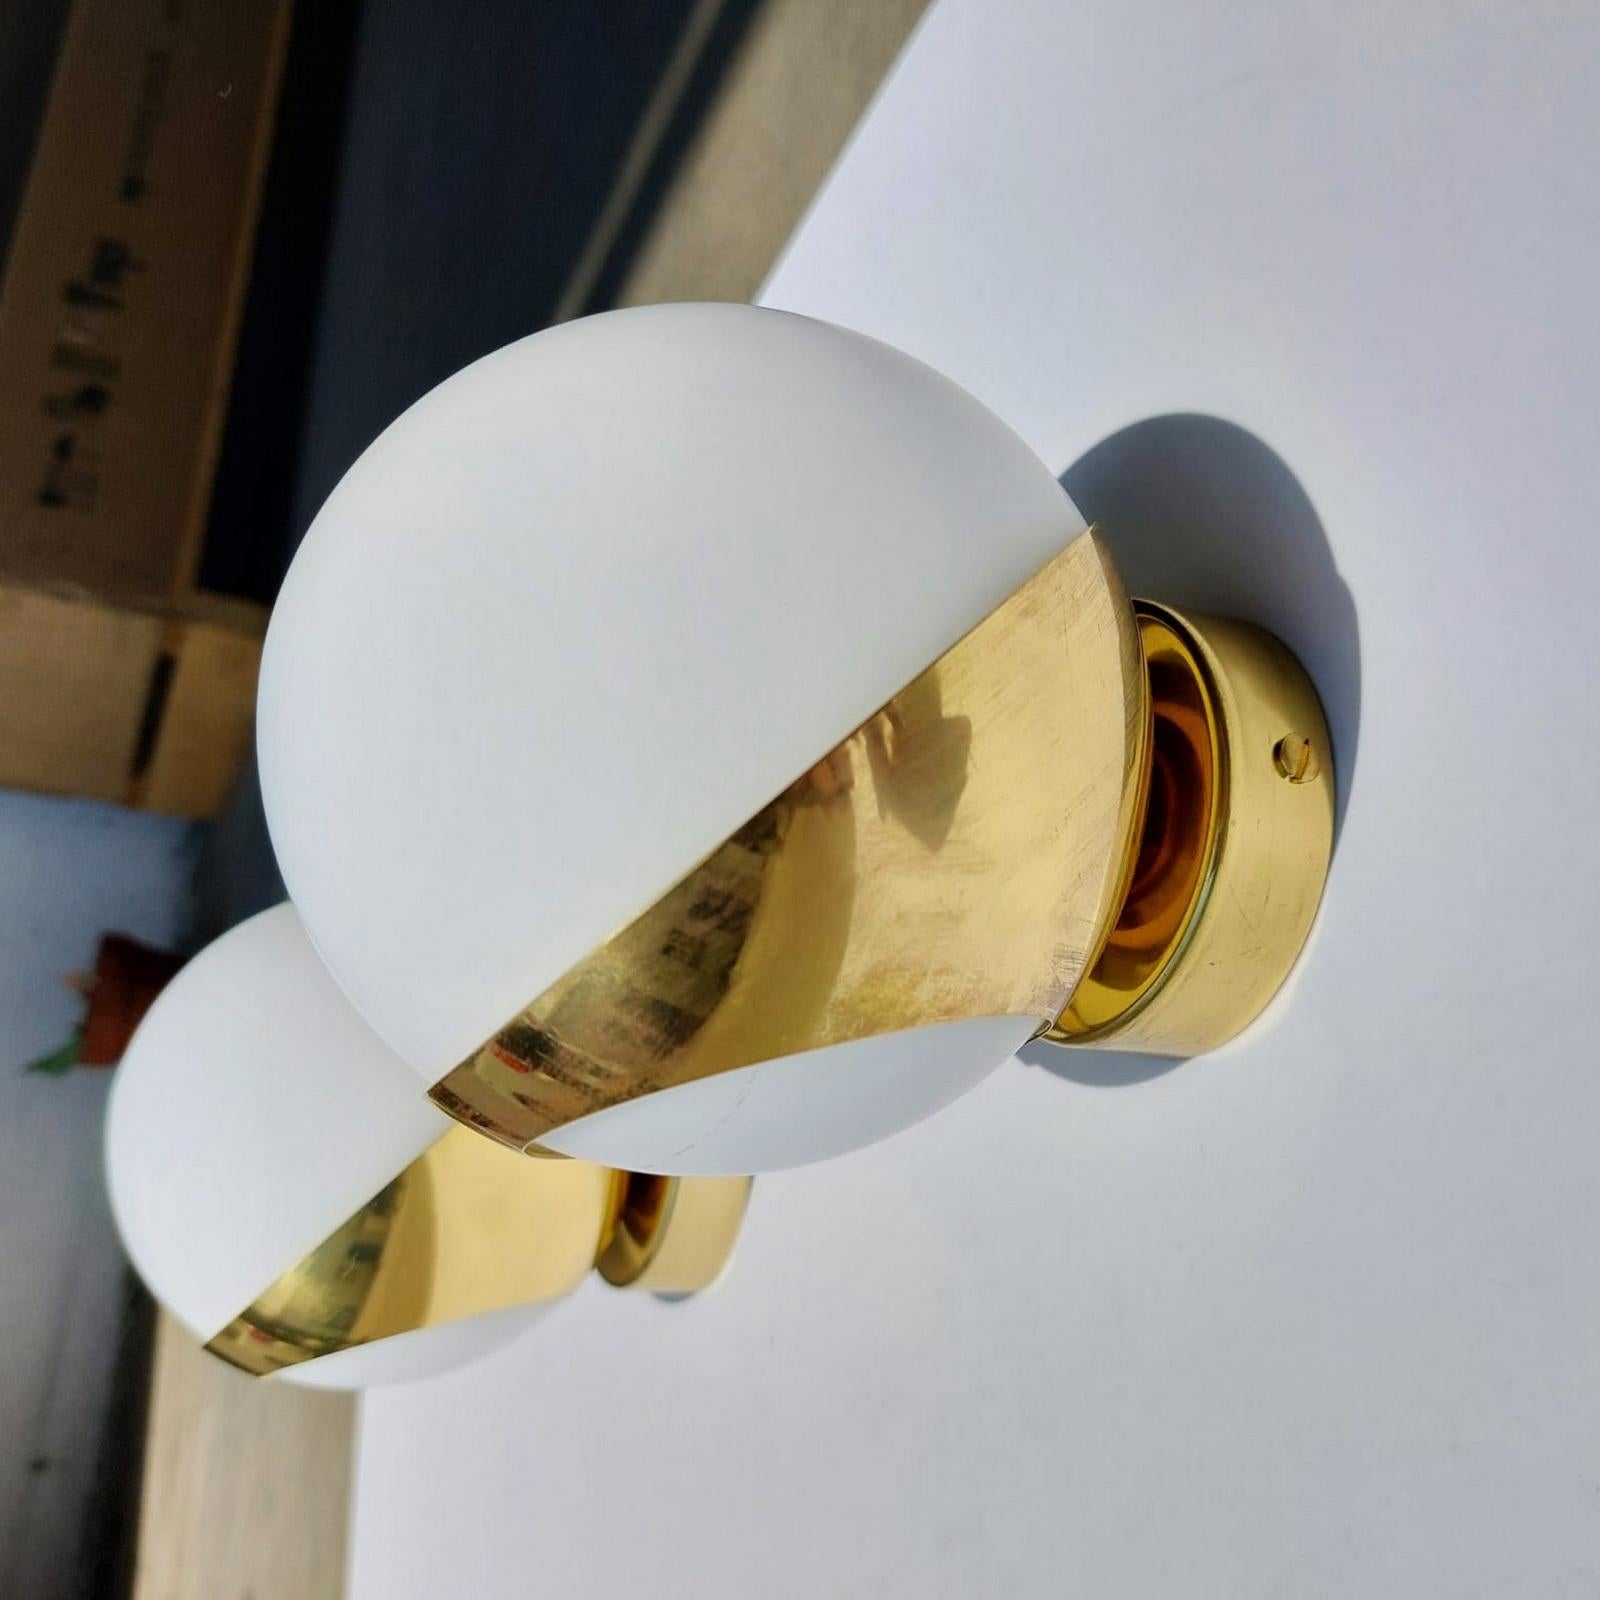 Mid-century design wall lights in the style of Stilnovo.
Stylish combination between brass & opaline glass !
These wall lights look amazing when lit and are a superb example of the famous Italian design of the 1950s.
Slight patina on the brass for